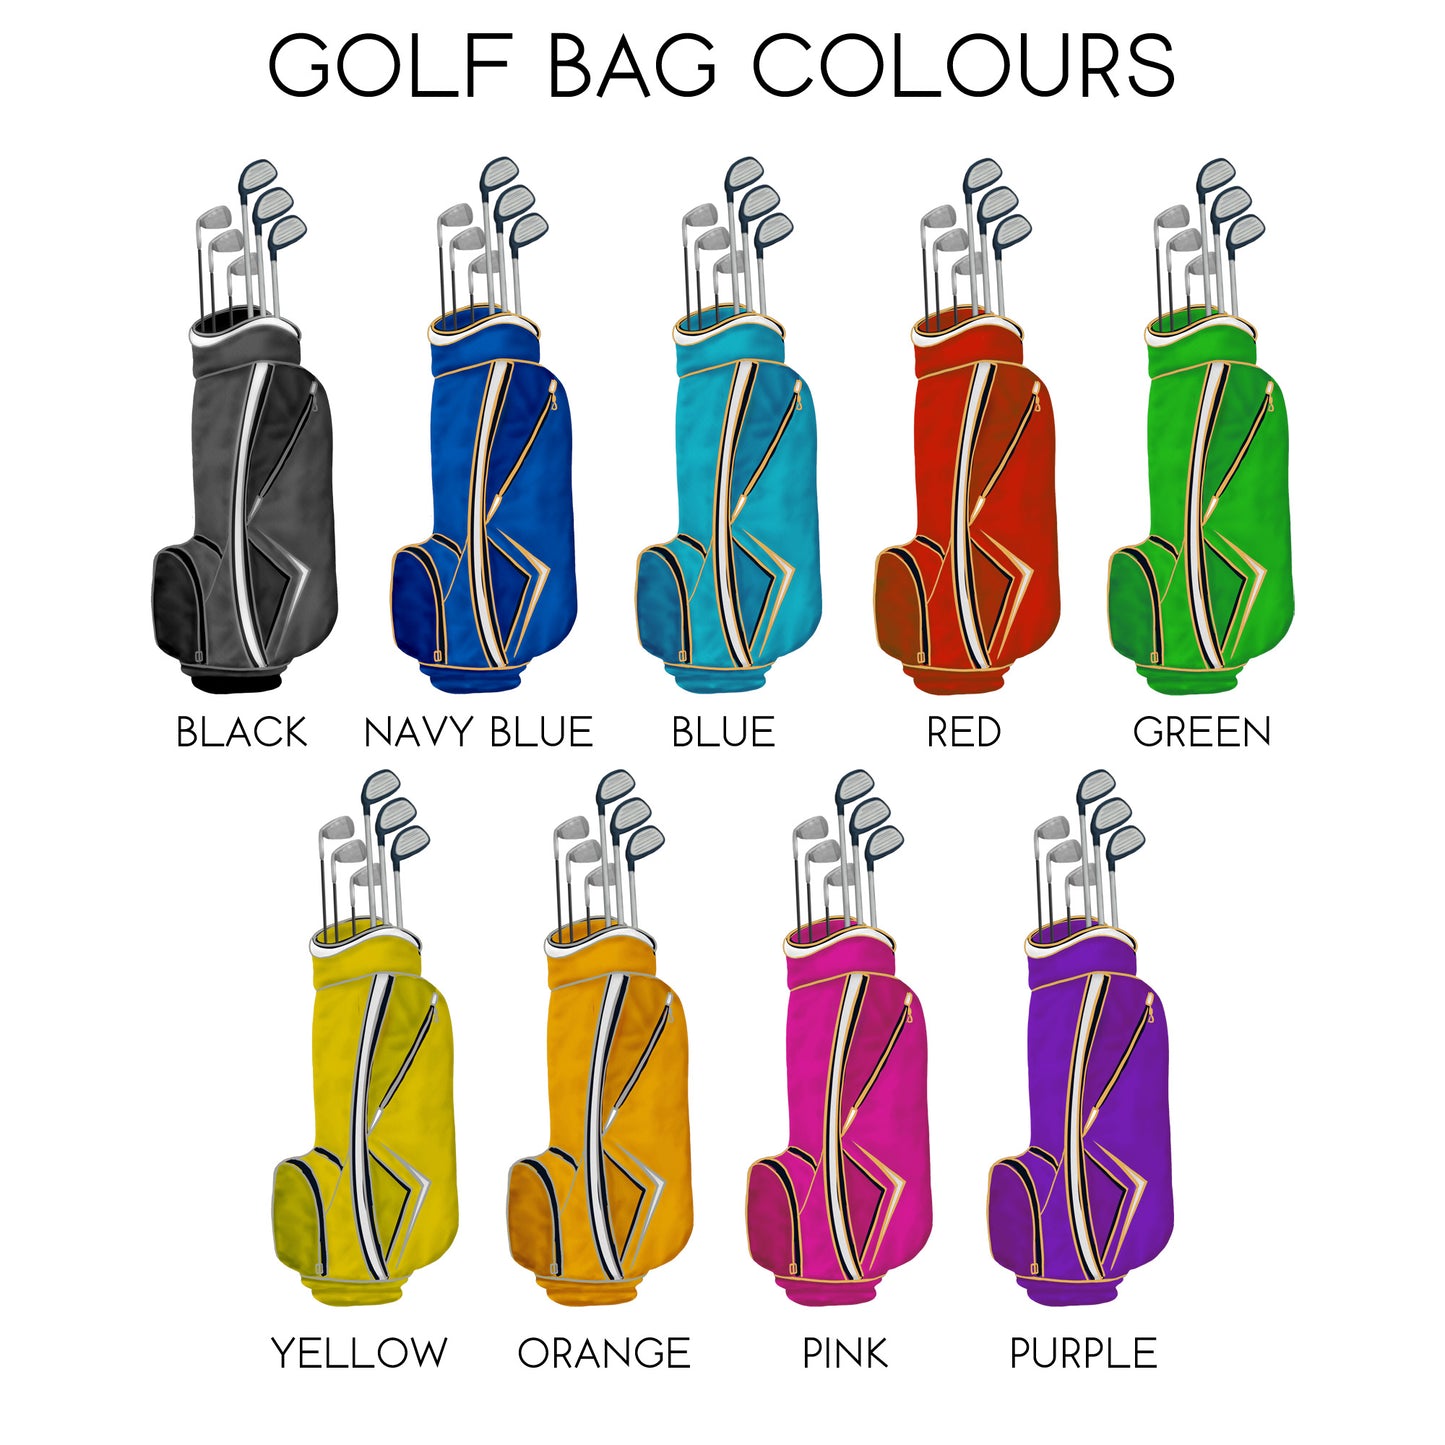 Personalised Family Golf Clubs Print